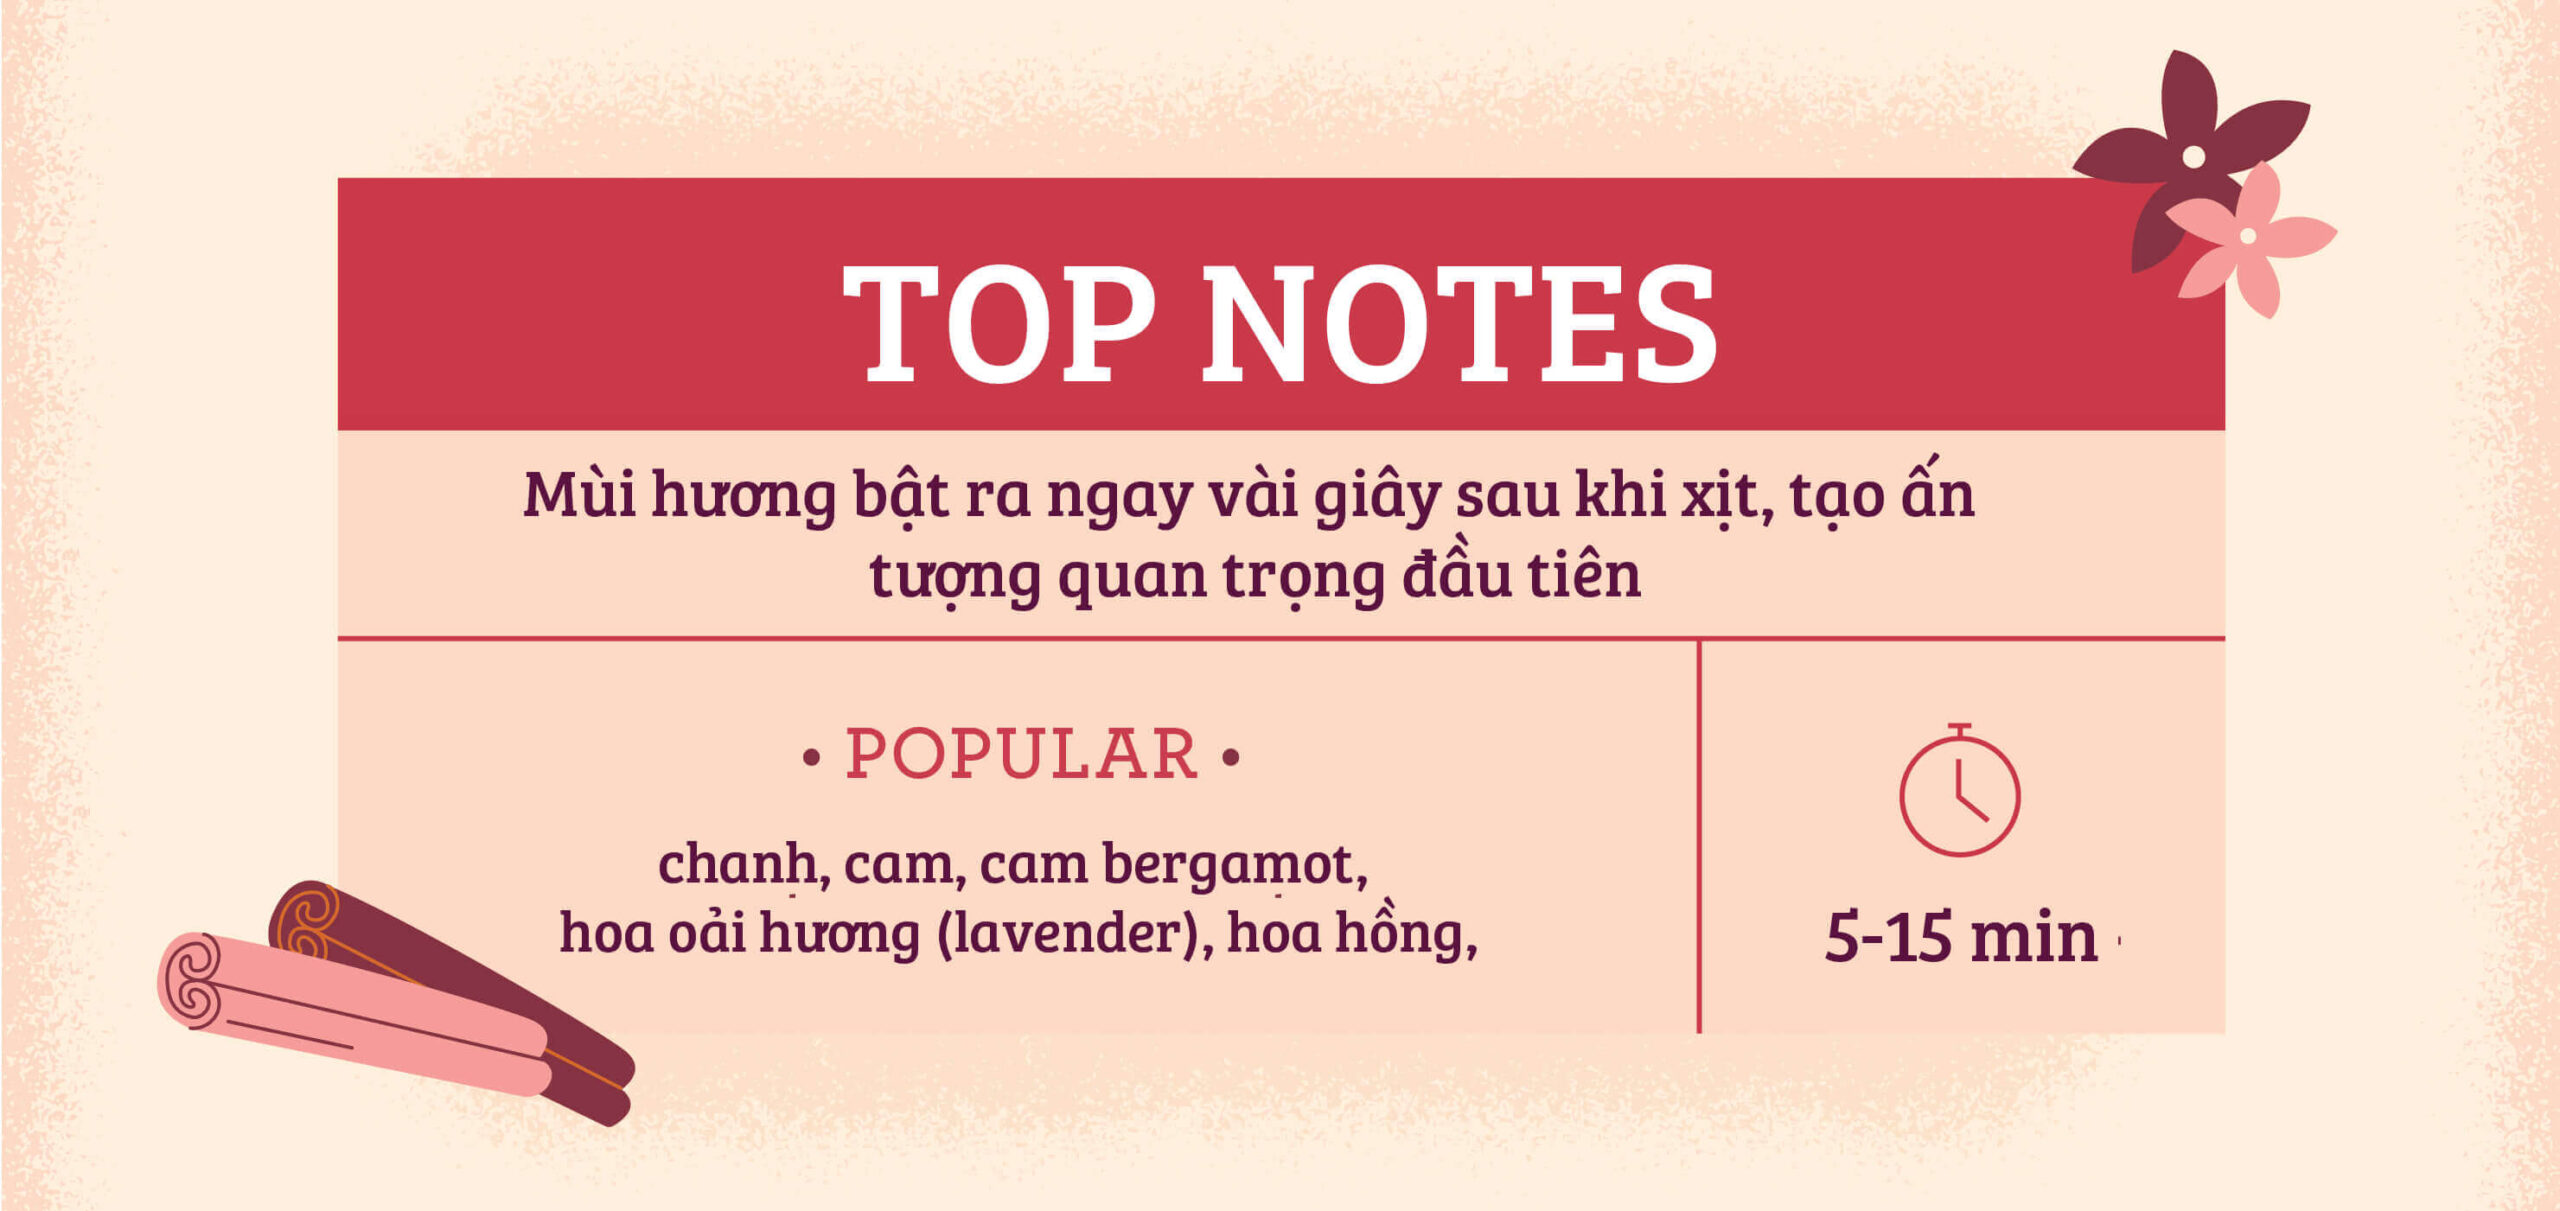 fragrance-notes-top-notes-01 (1) (1)